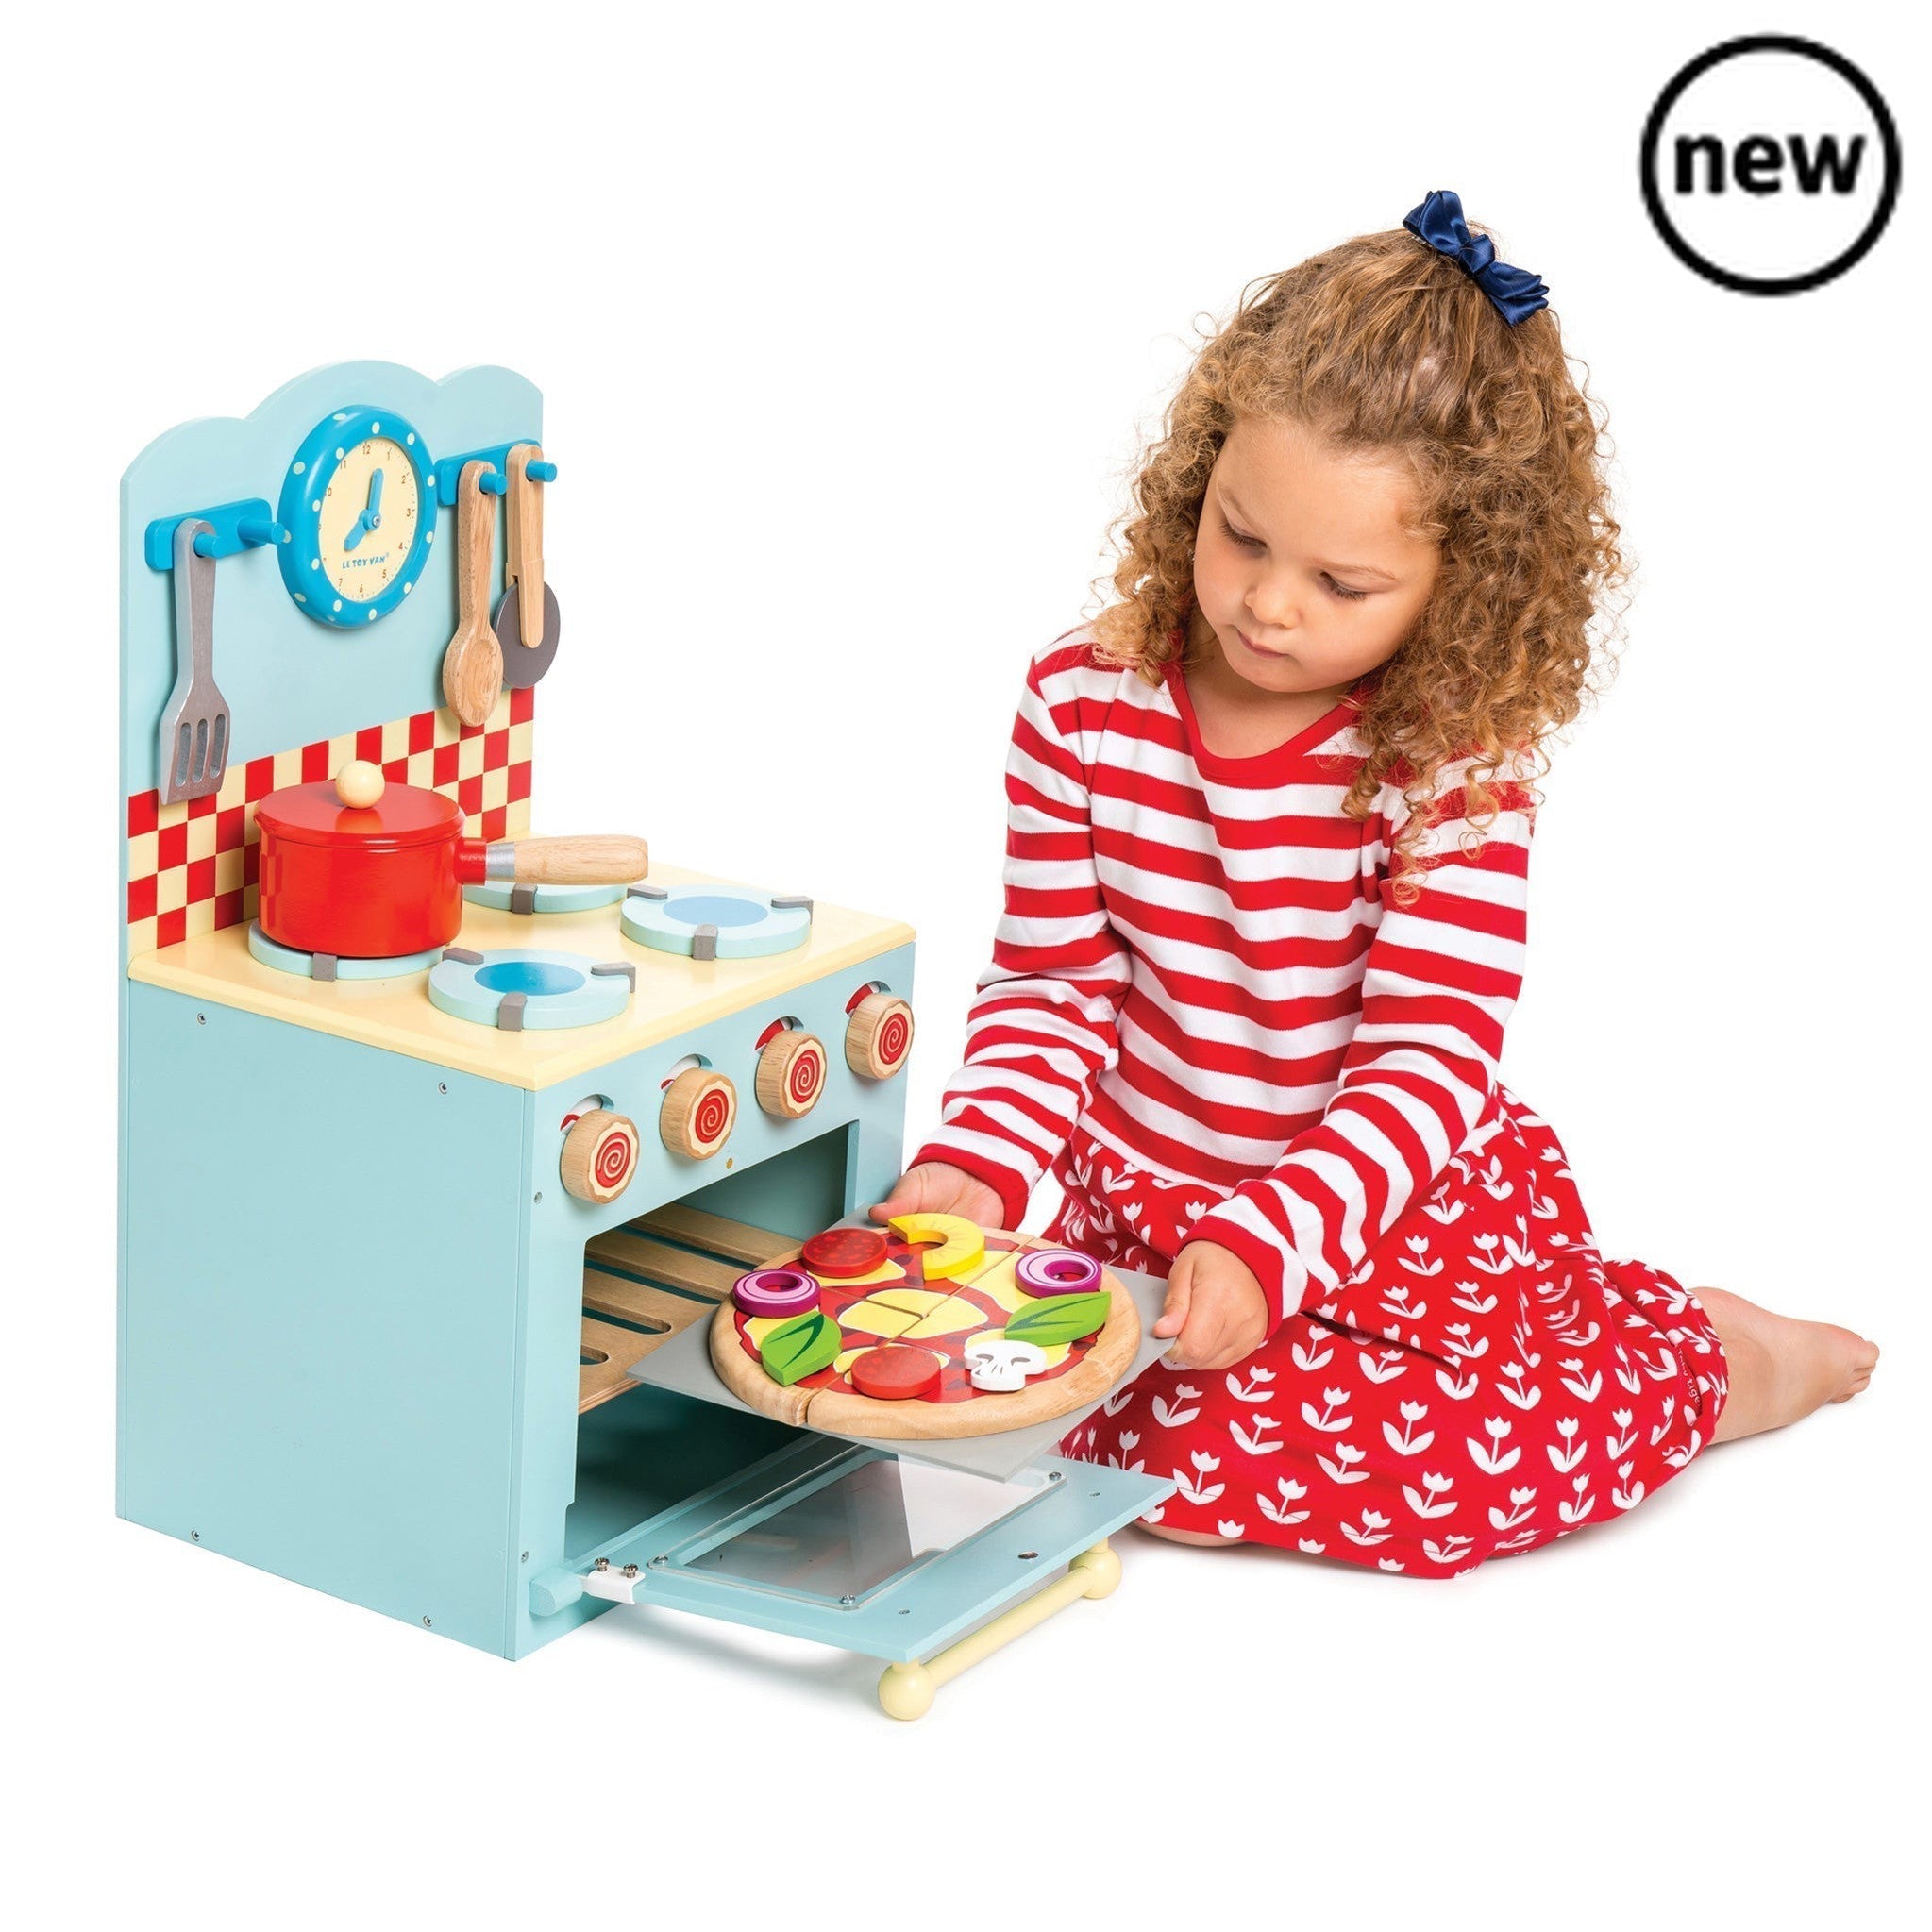 Oven & Hob Blue, Description Our Oven and Hob set is the perfect toy for budding cooks and mini bakers. This delightful play oven is full of fun, with a variety of bright play accessories and inspiring details to encourage imaginative, role play and learning development. Designed in a traditional style, this nostalgic toy is built to last, made from durable and sustainable wood and features rustic movable dials, an opening oven door, a clock with moving hands to set the cooking time, plus a cooking pot, spo